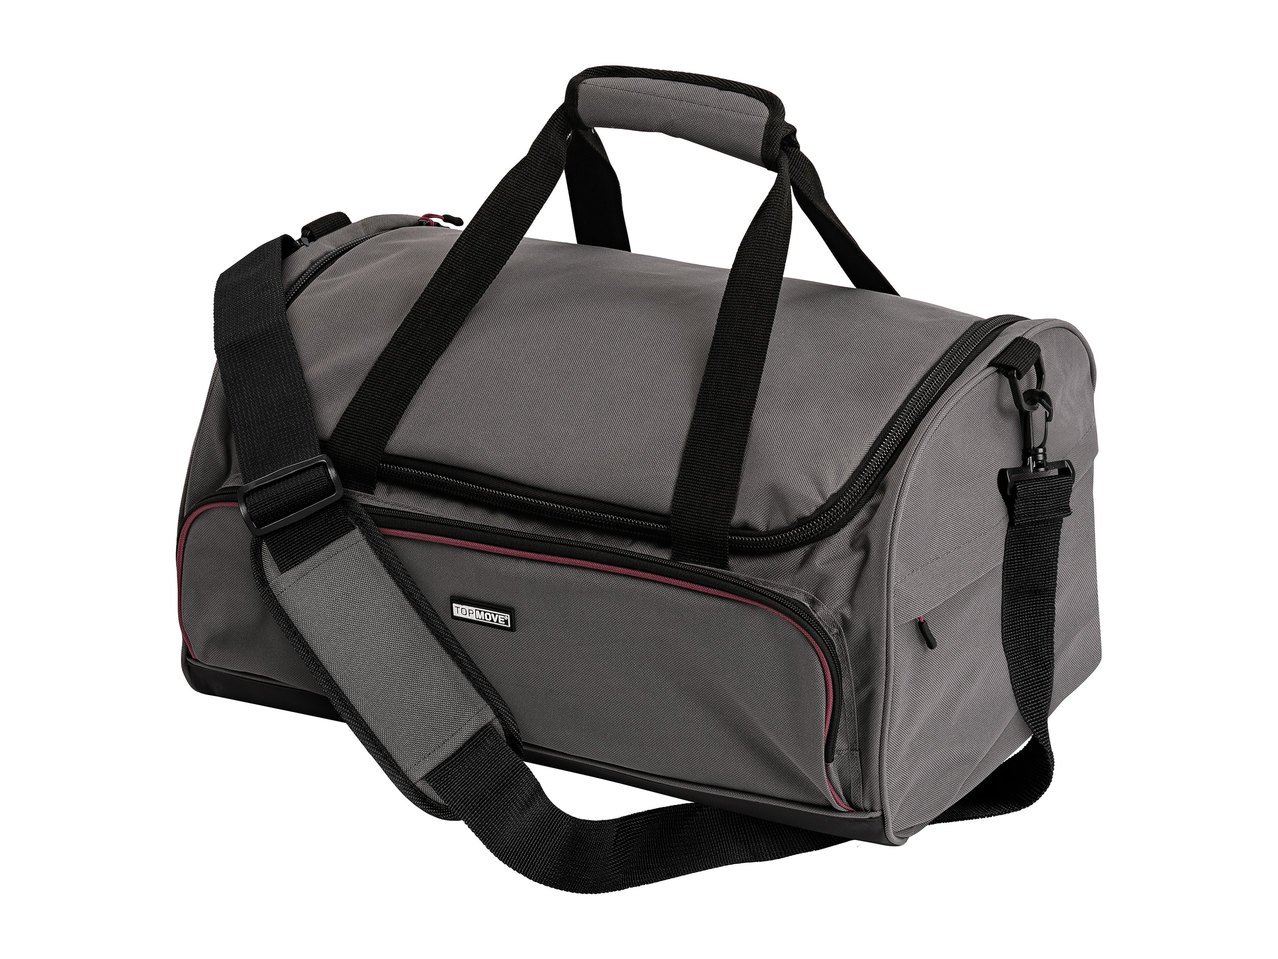 Top Move Travel Bag with Built-In Organiser Shelves1